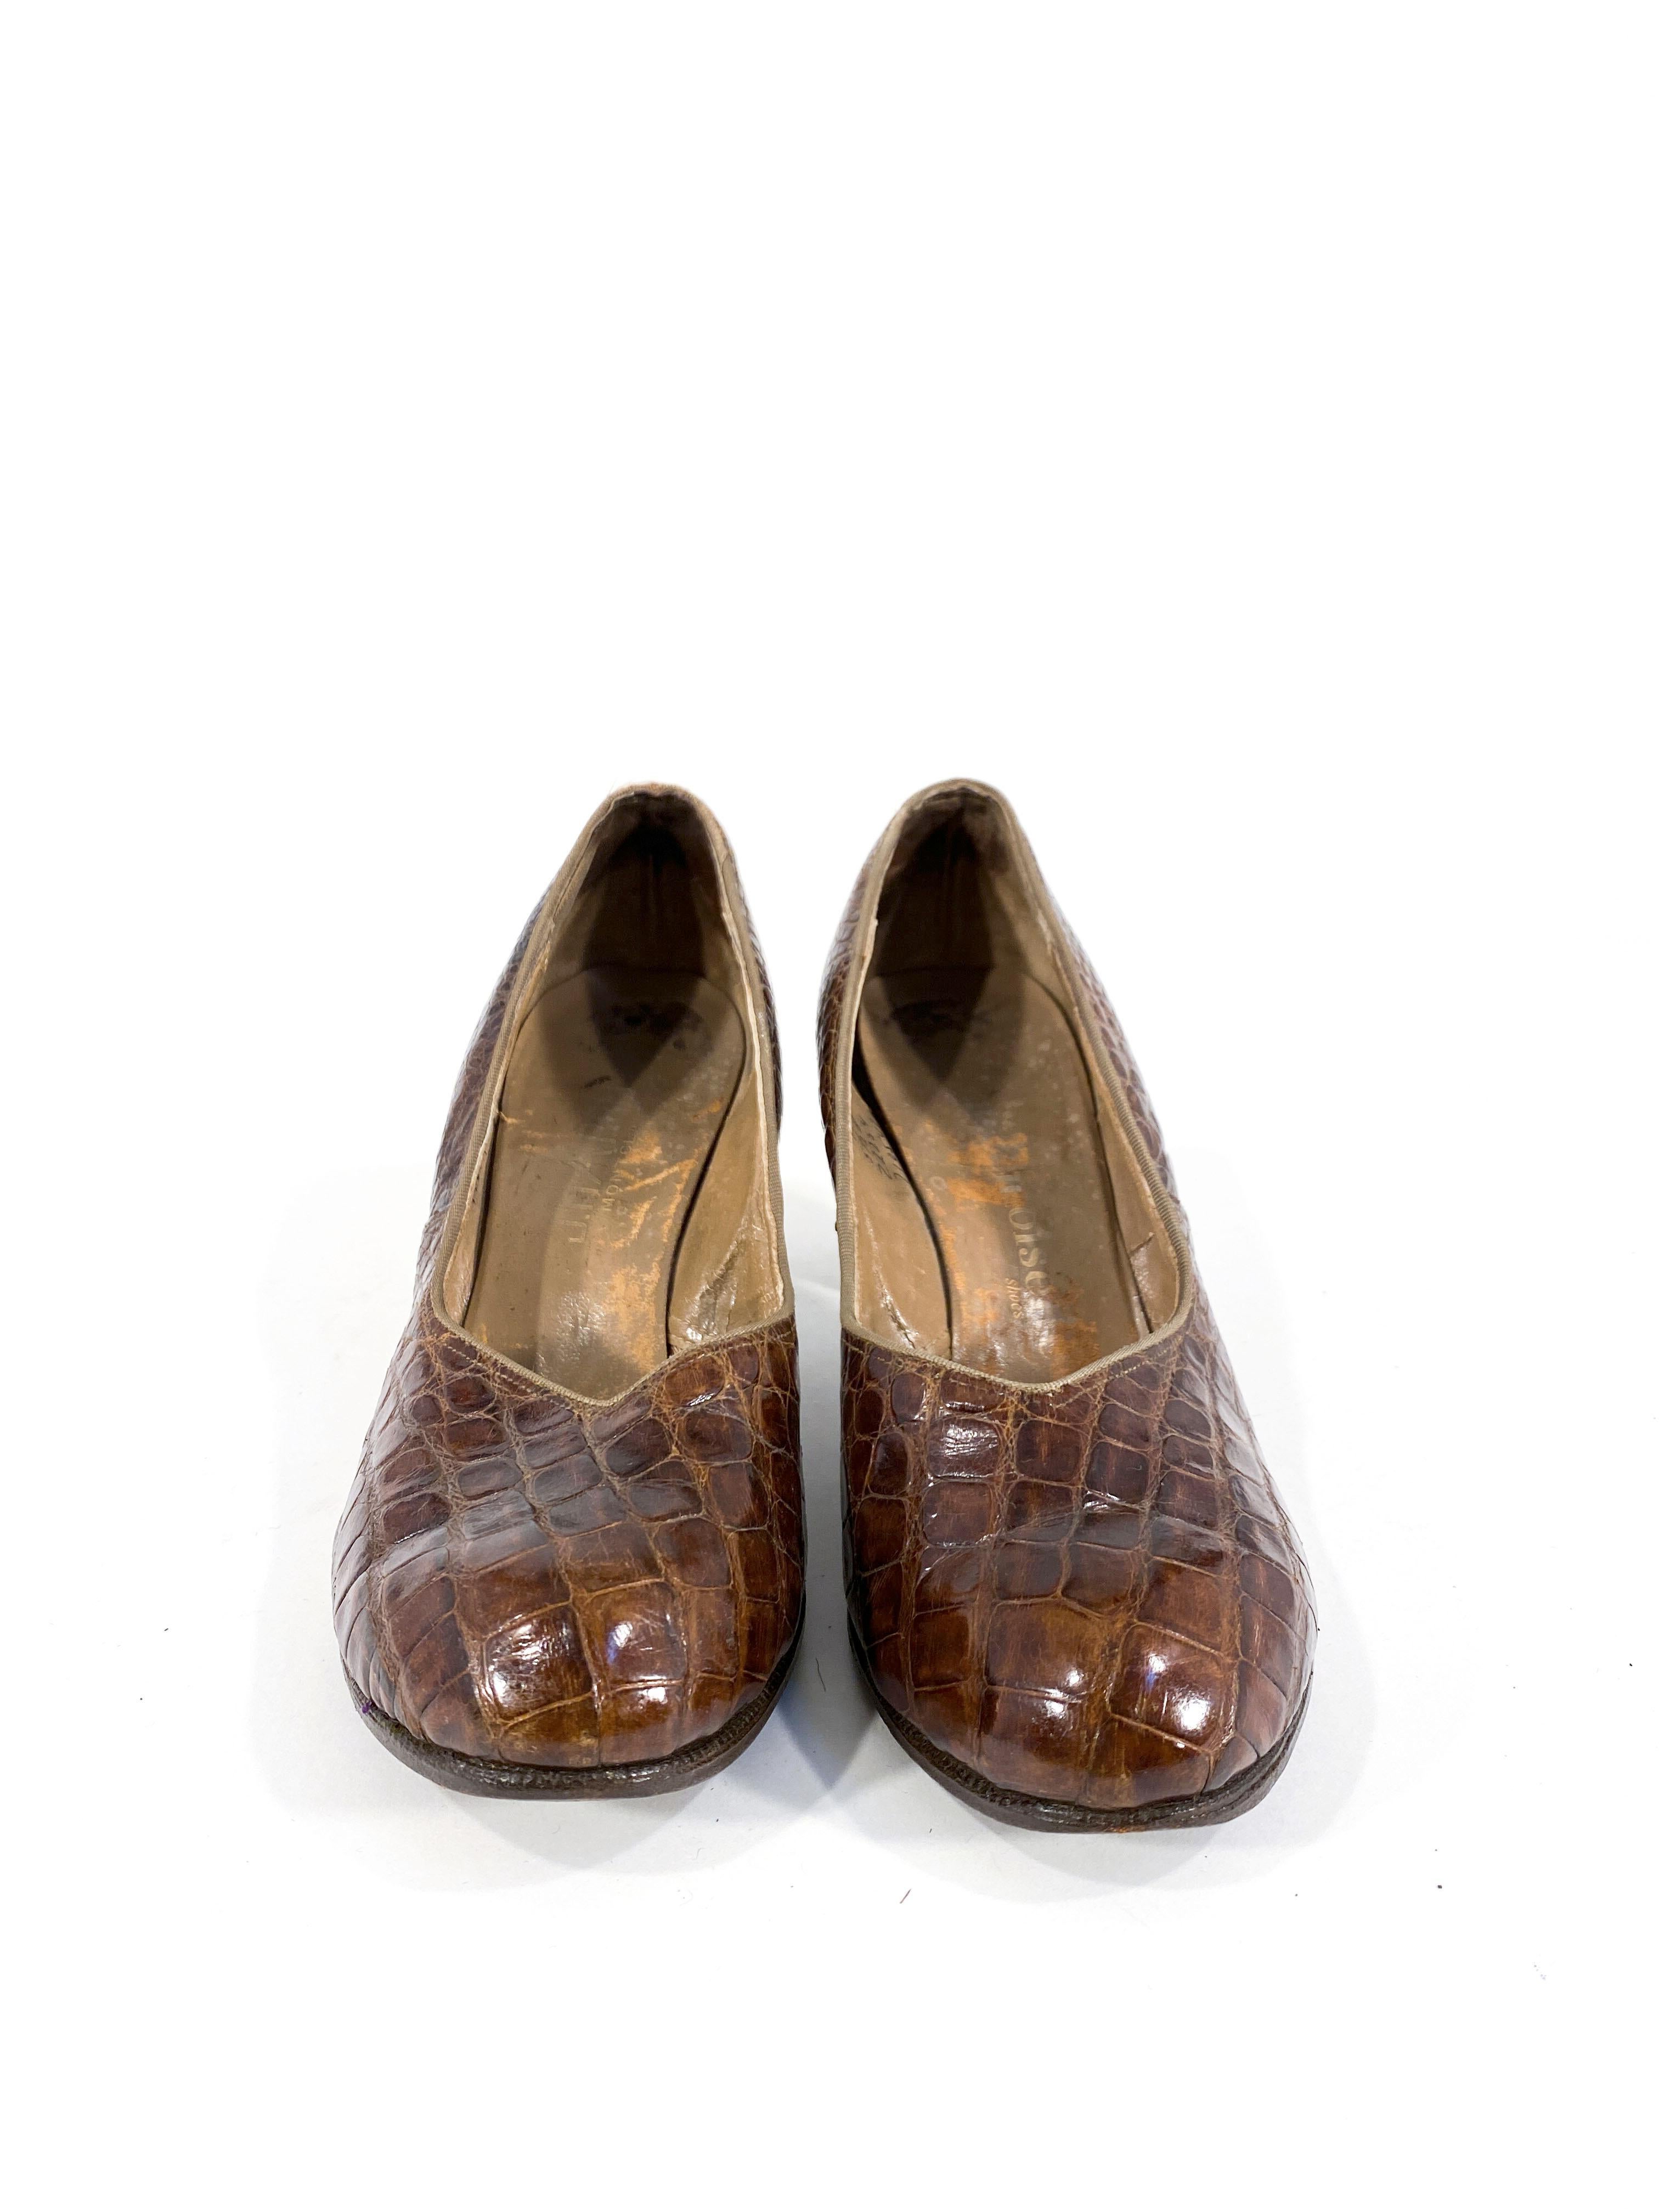 1940s brown alligator round-toe pumps with a 2.5 inch sensible heel. 